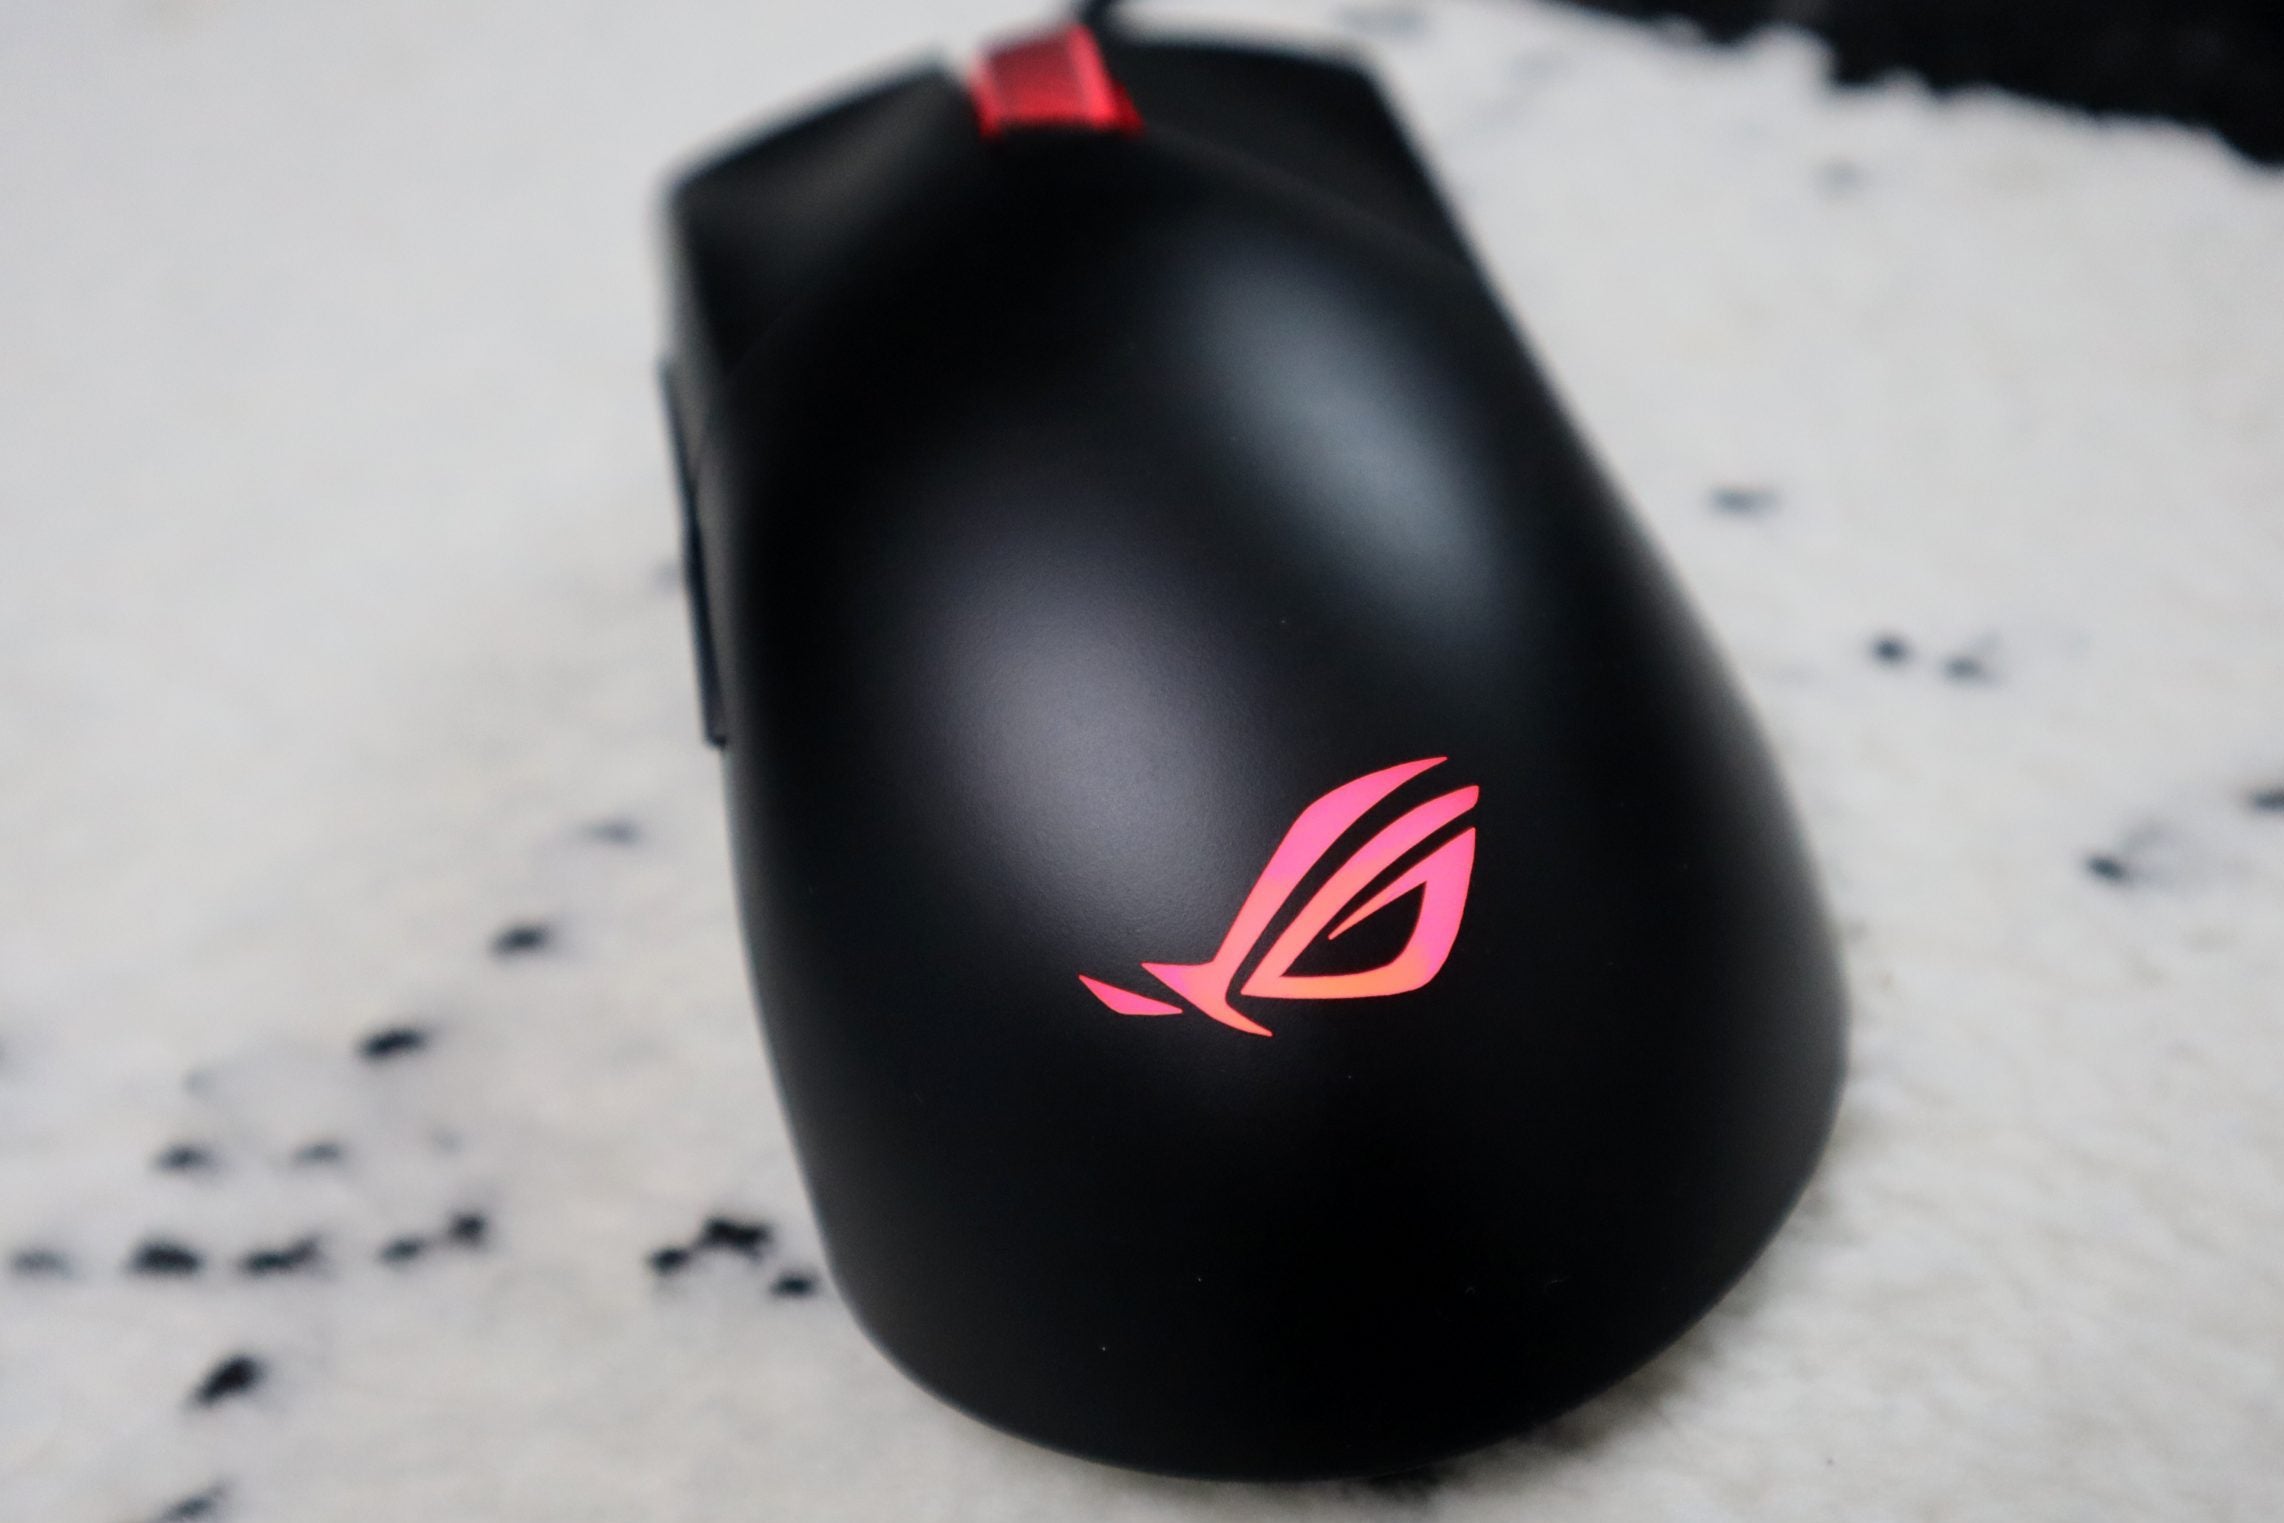 The Asus ROG logo shown on the mouse, glowing thanks to RGB lighting